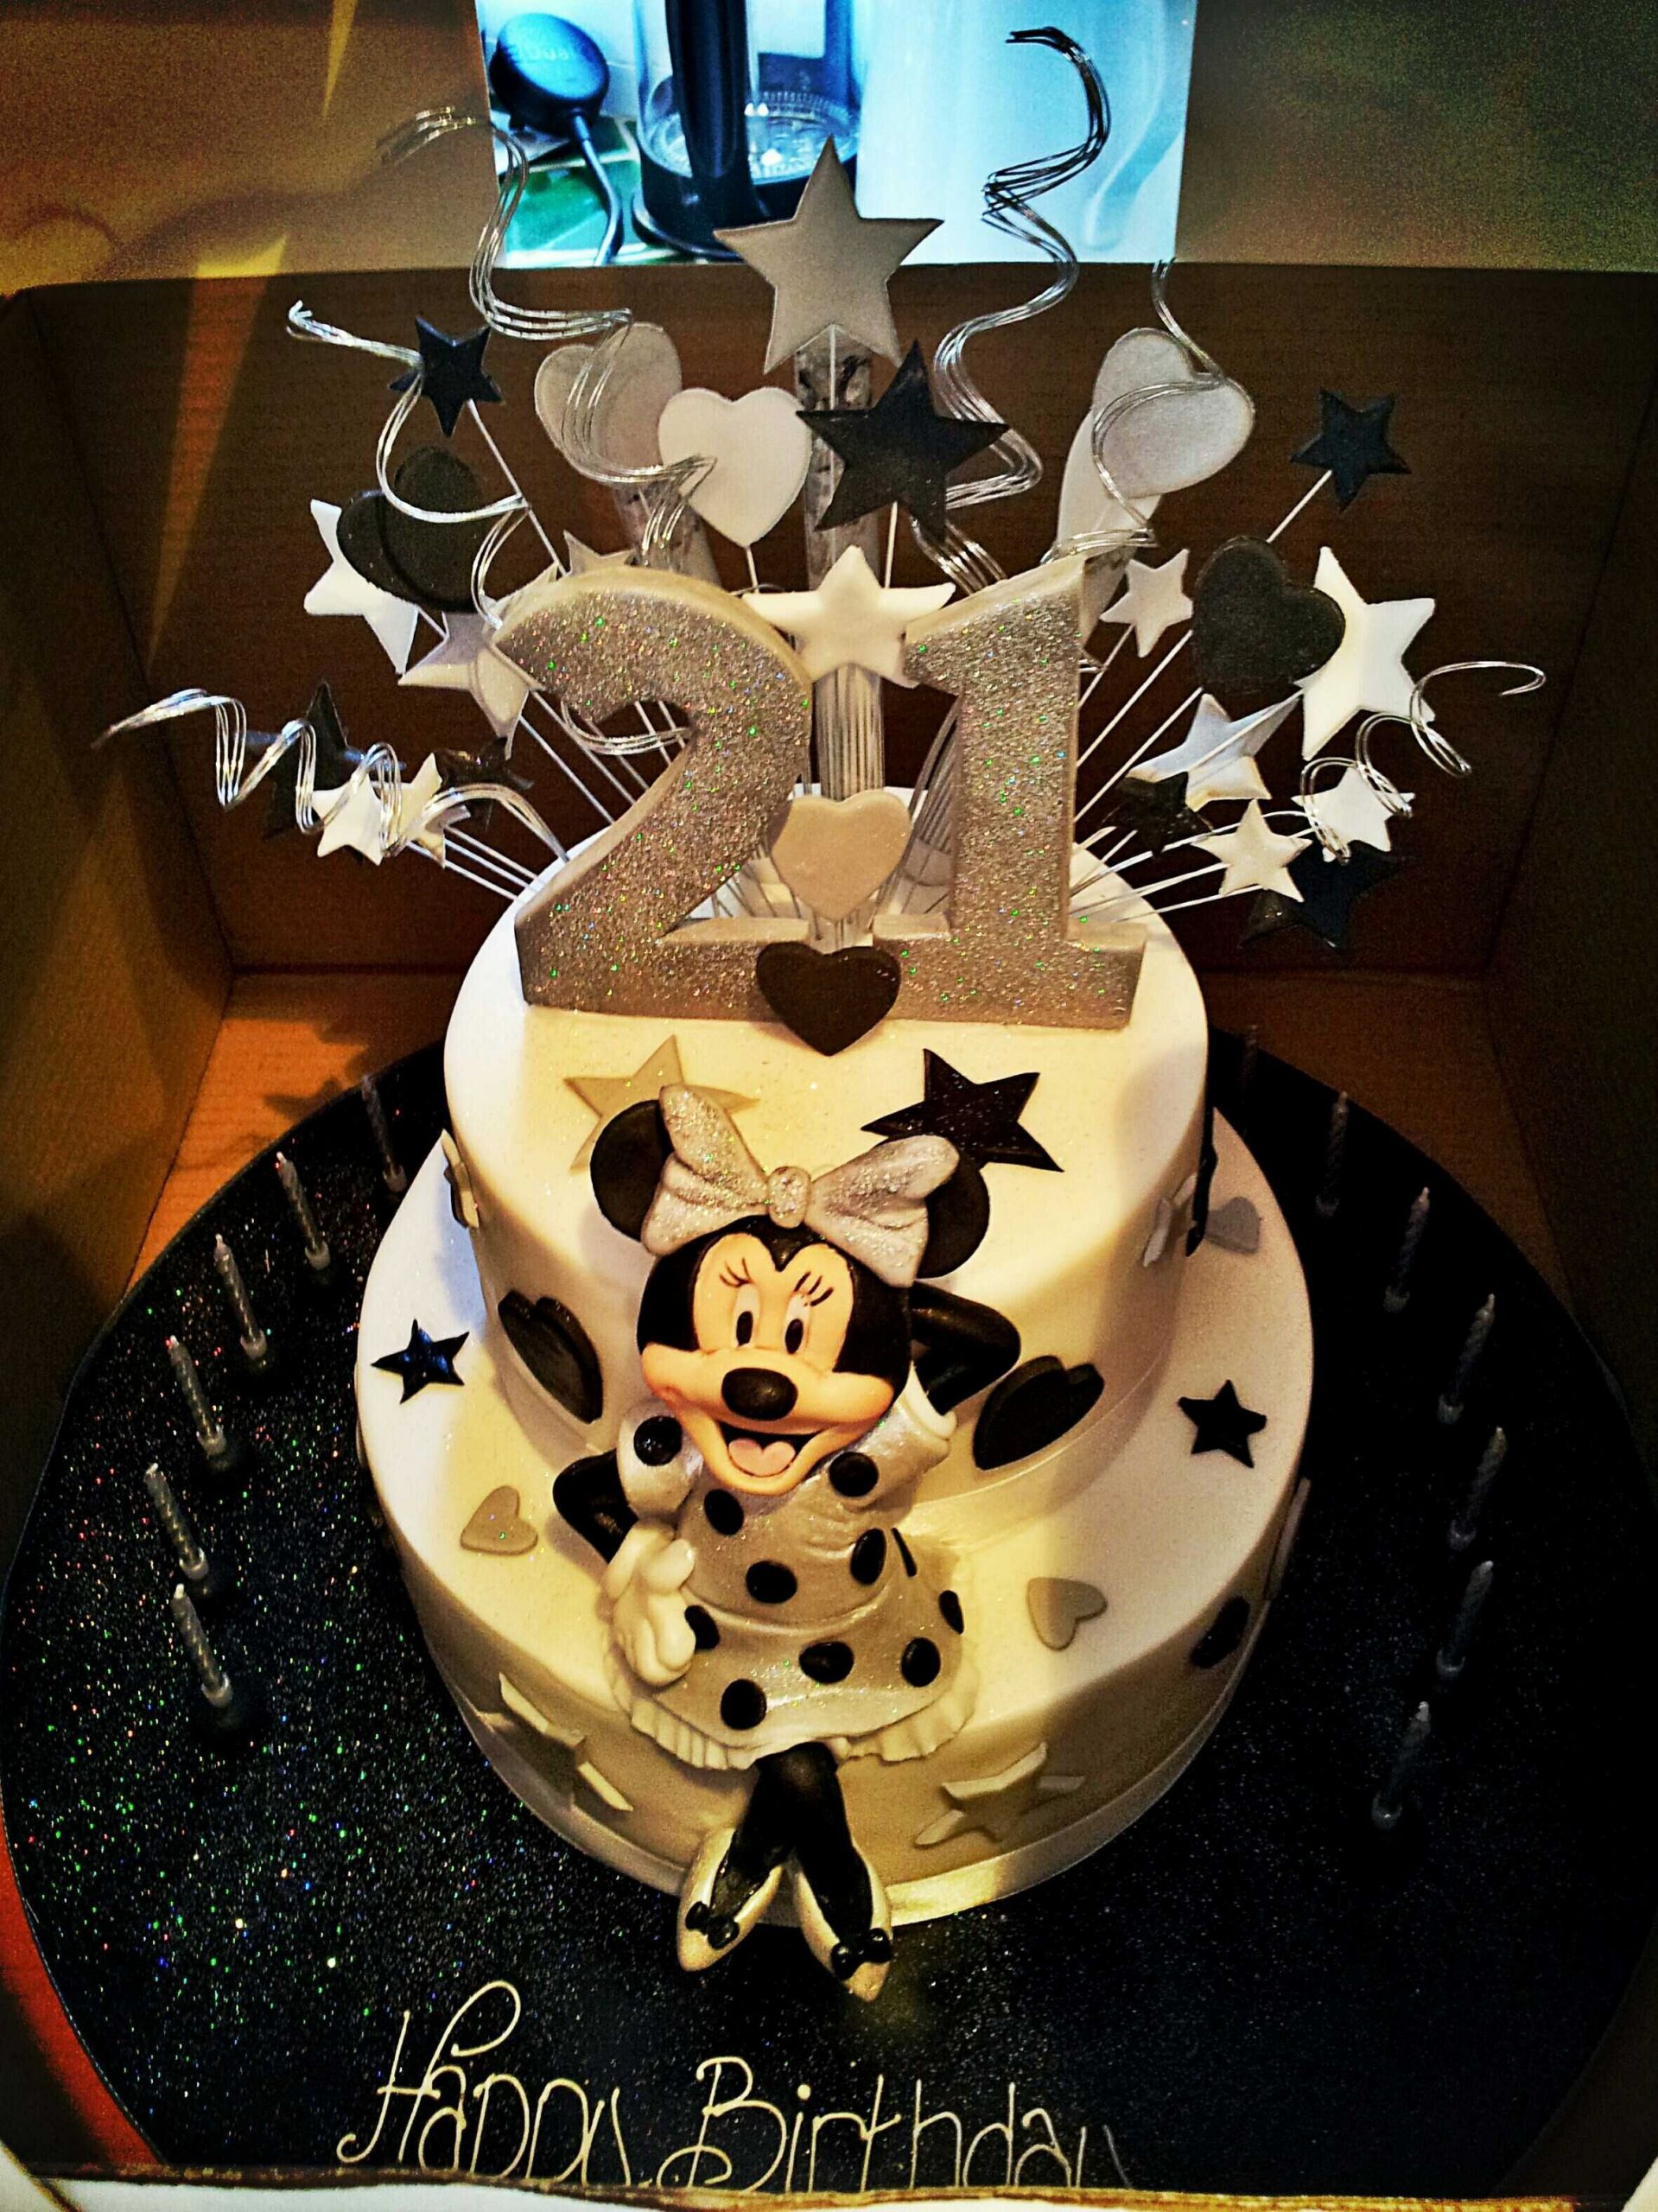 21st Birthday Cake Decorations
 I REALLY WANT THIS CAKE Disney Minnie Mouse 21st